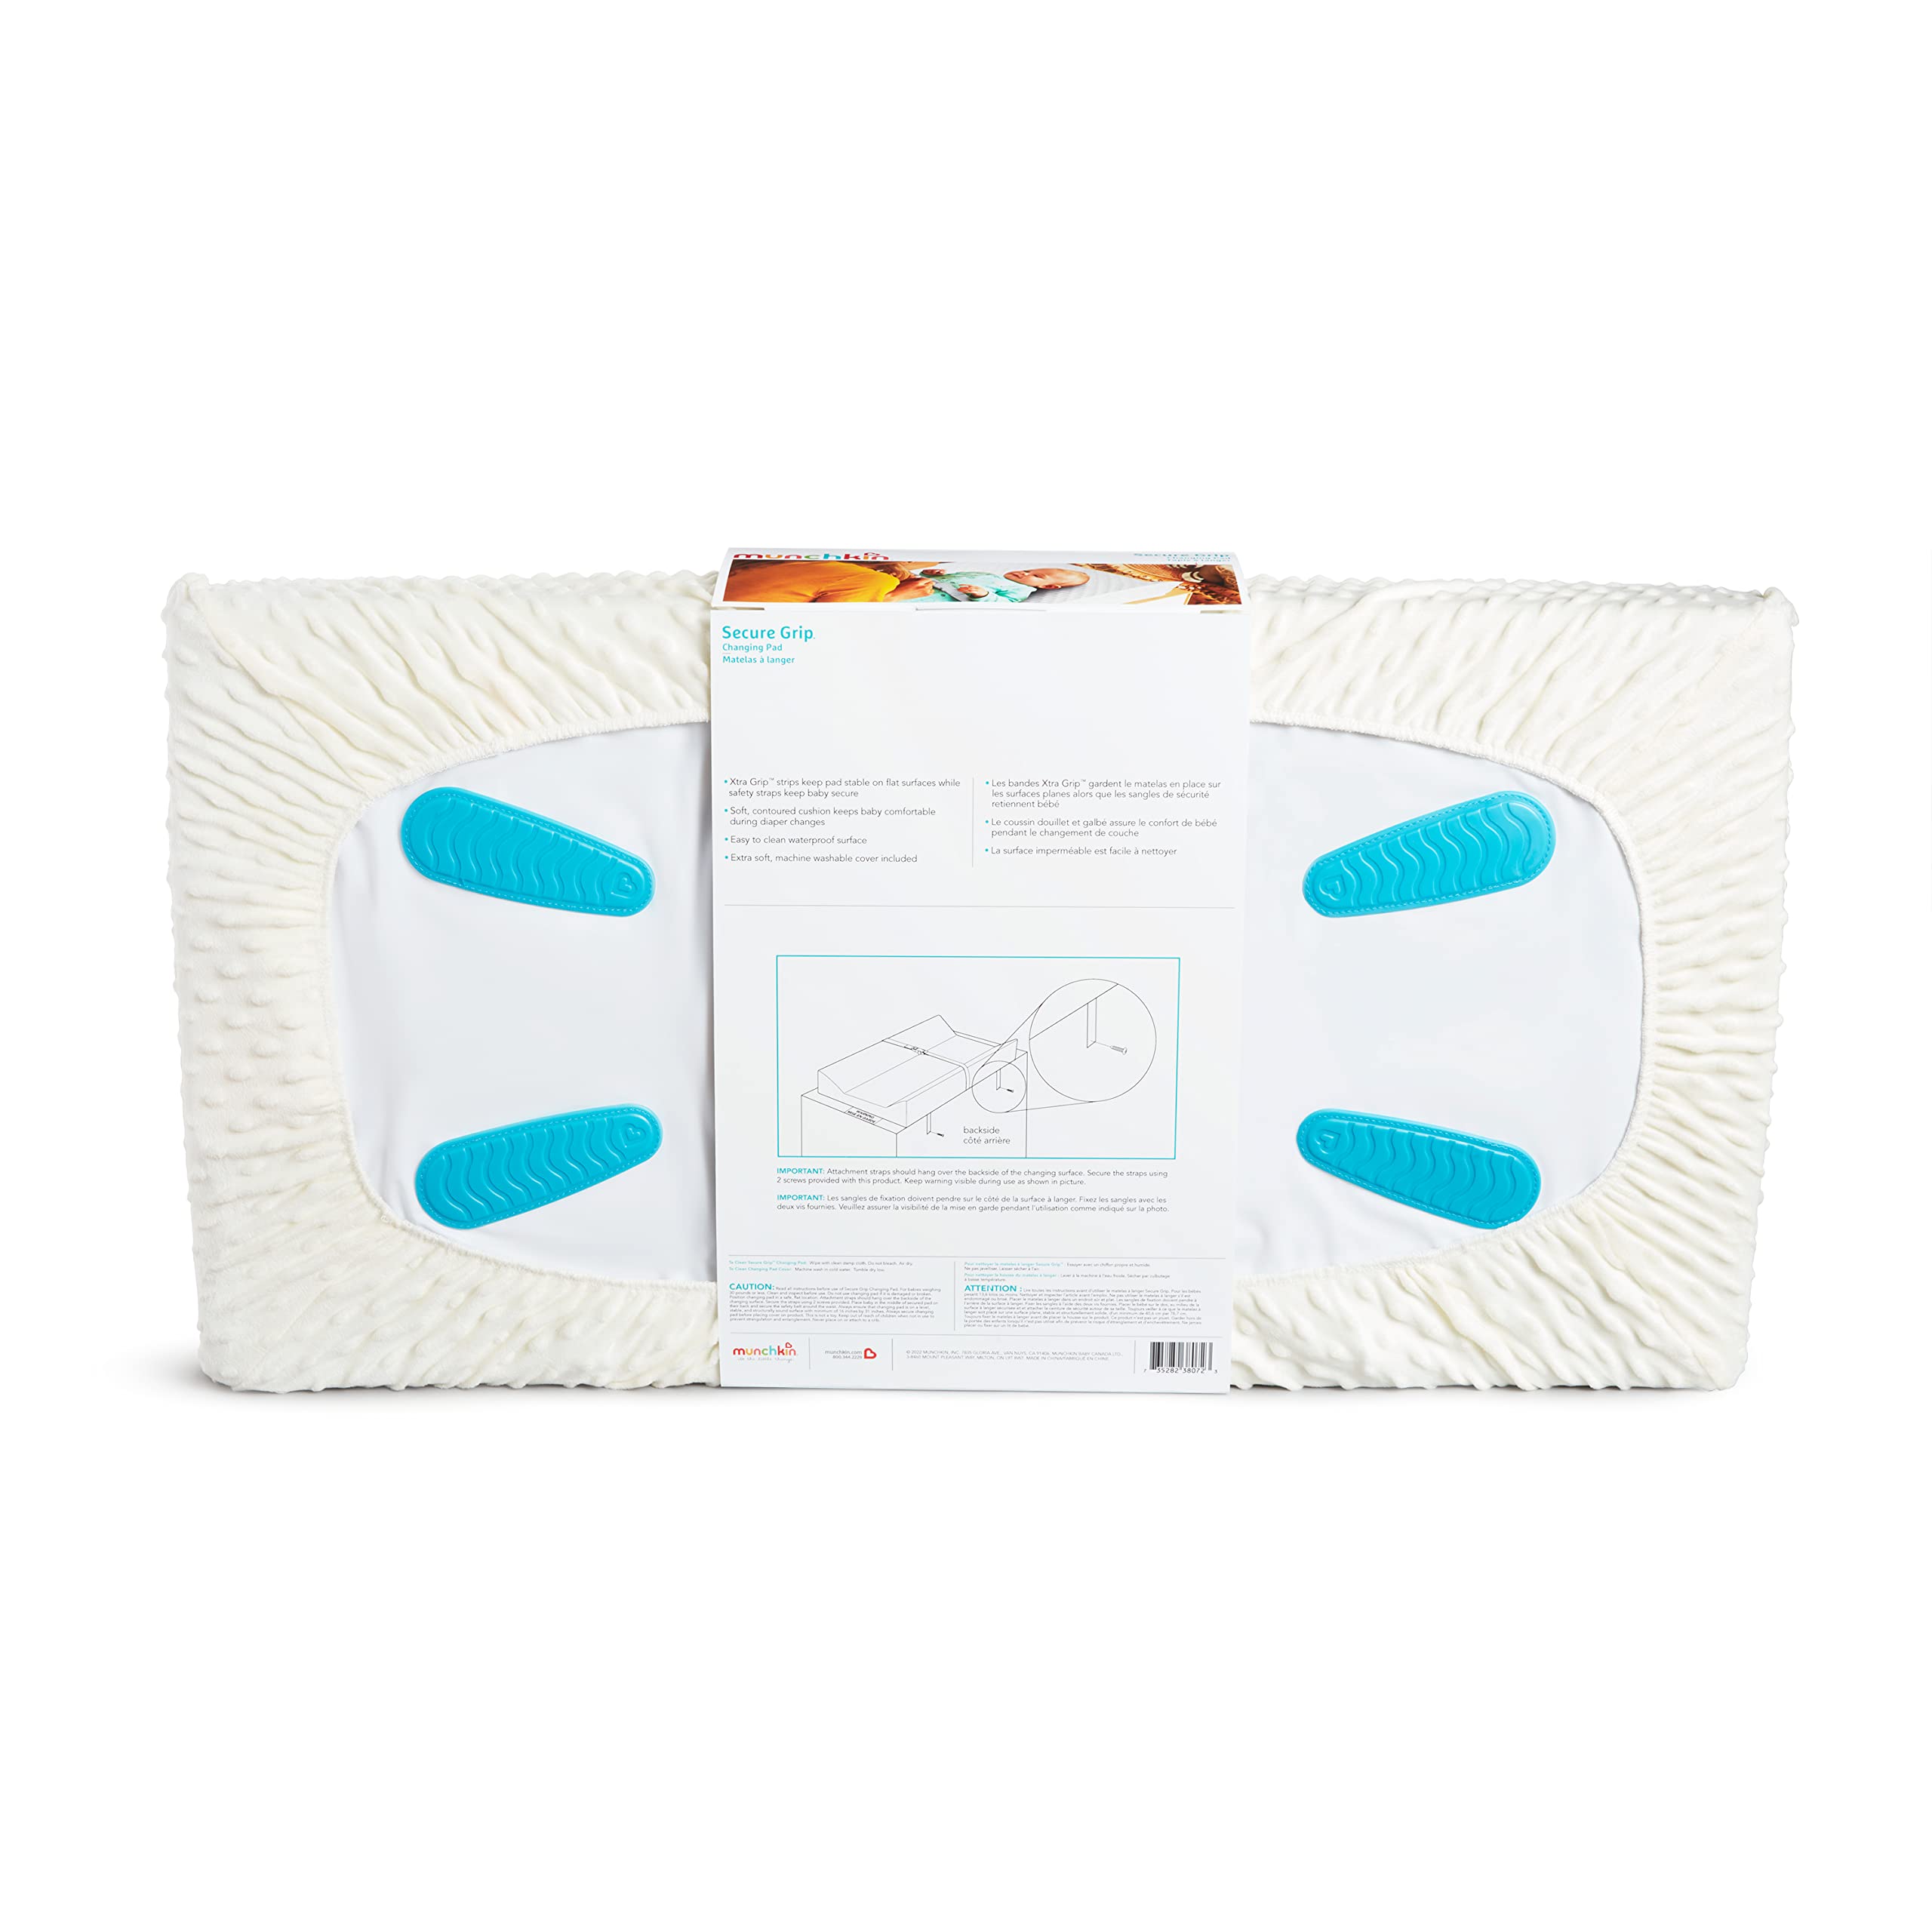 Munchkin® Secure Grip™ Contoured Baby Diaper Changing Pad for Dresser, Includes Cover, Waterproof Pad